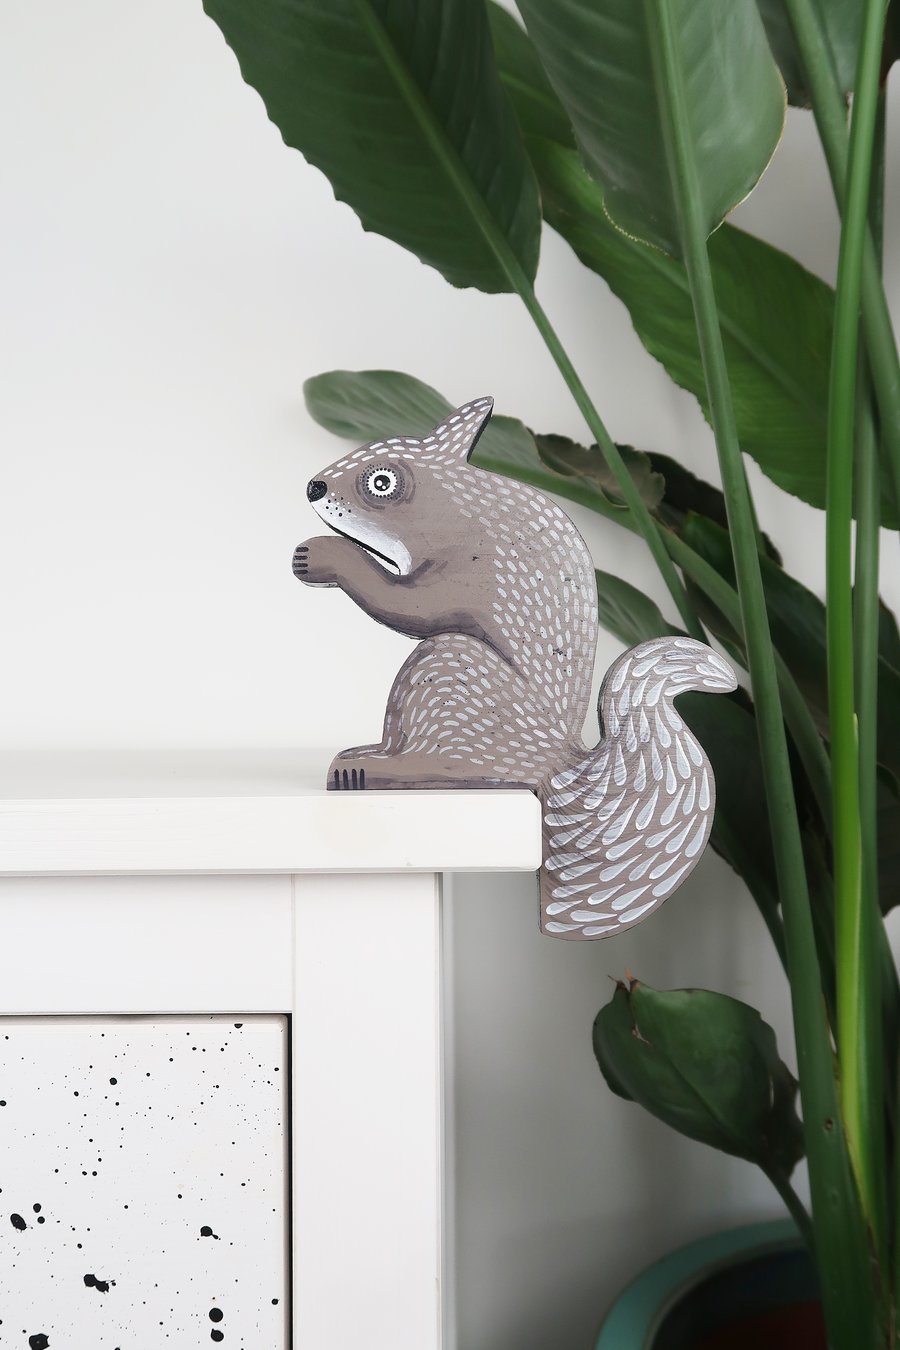 Grey squirrel door topper, forest theme home decor, decoration for door frame.